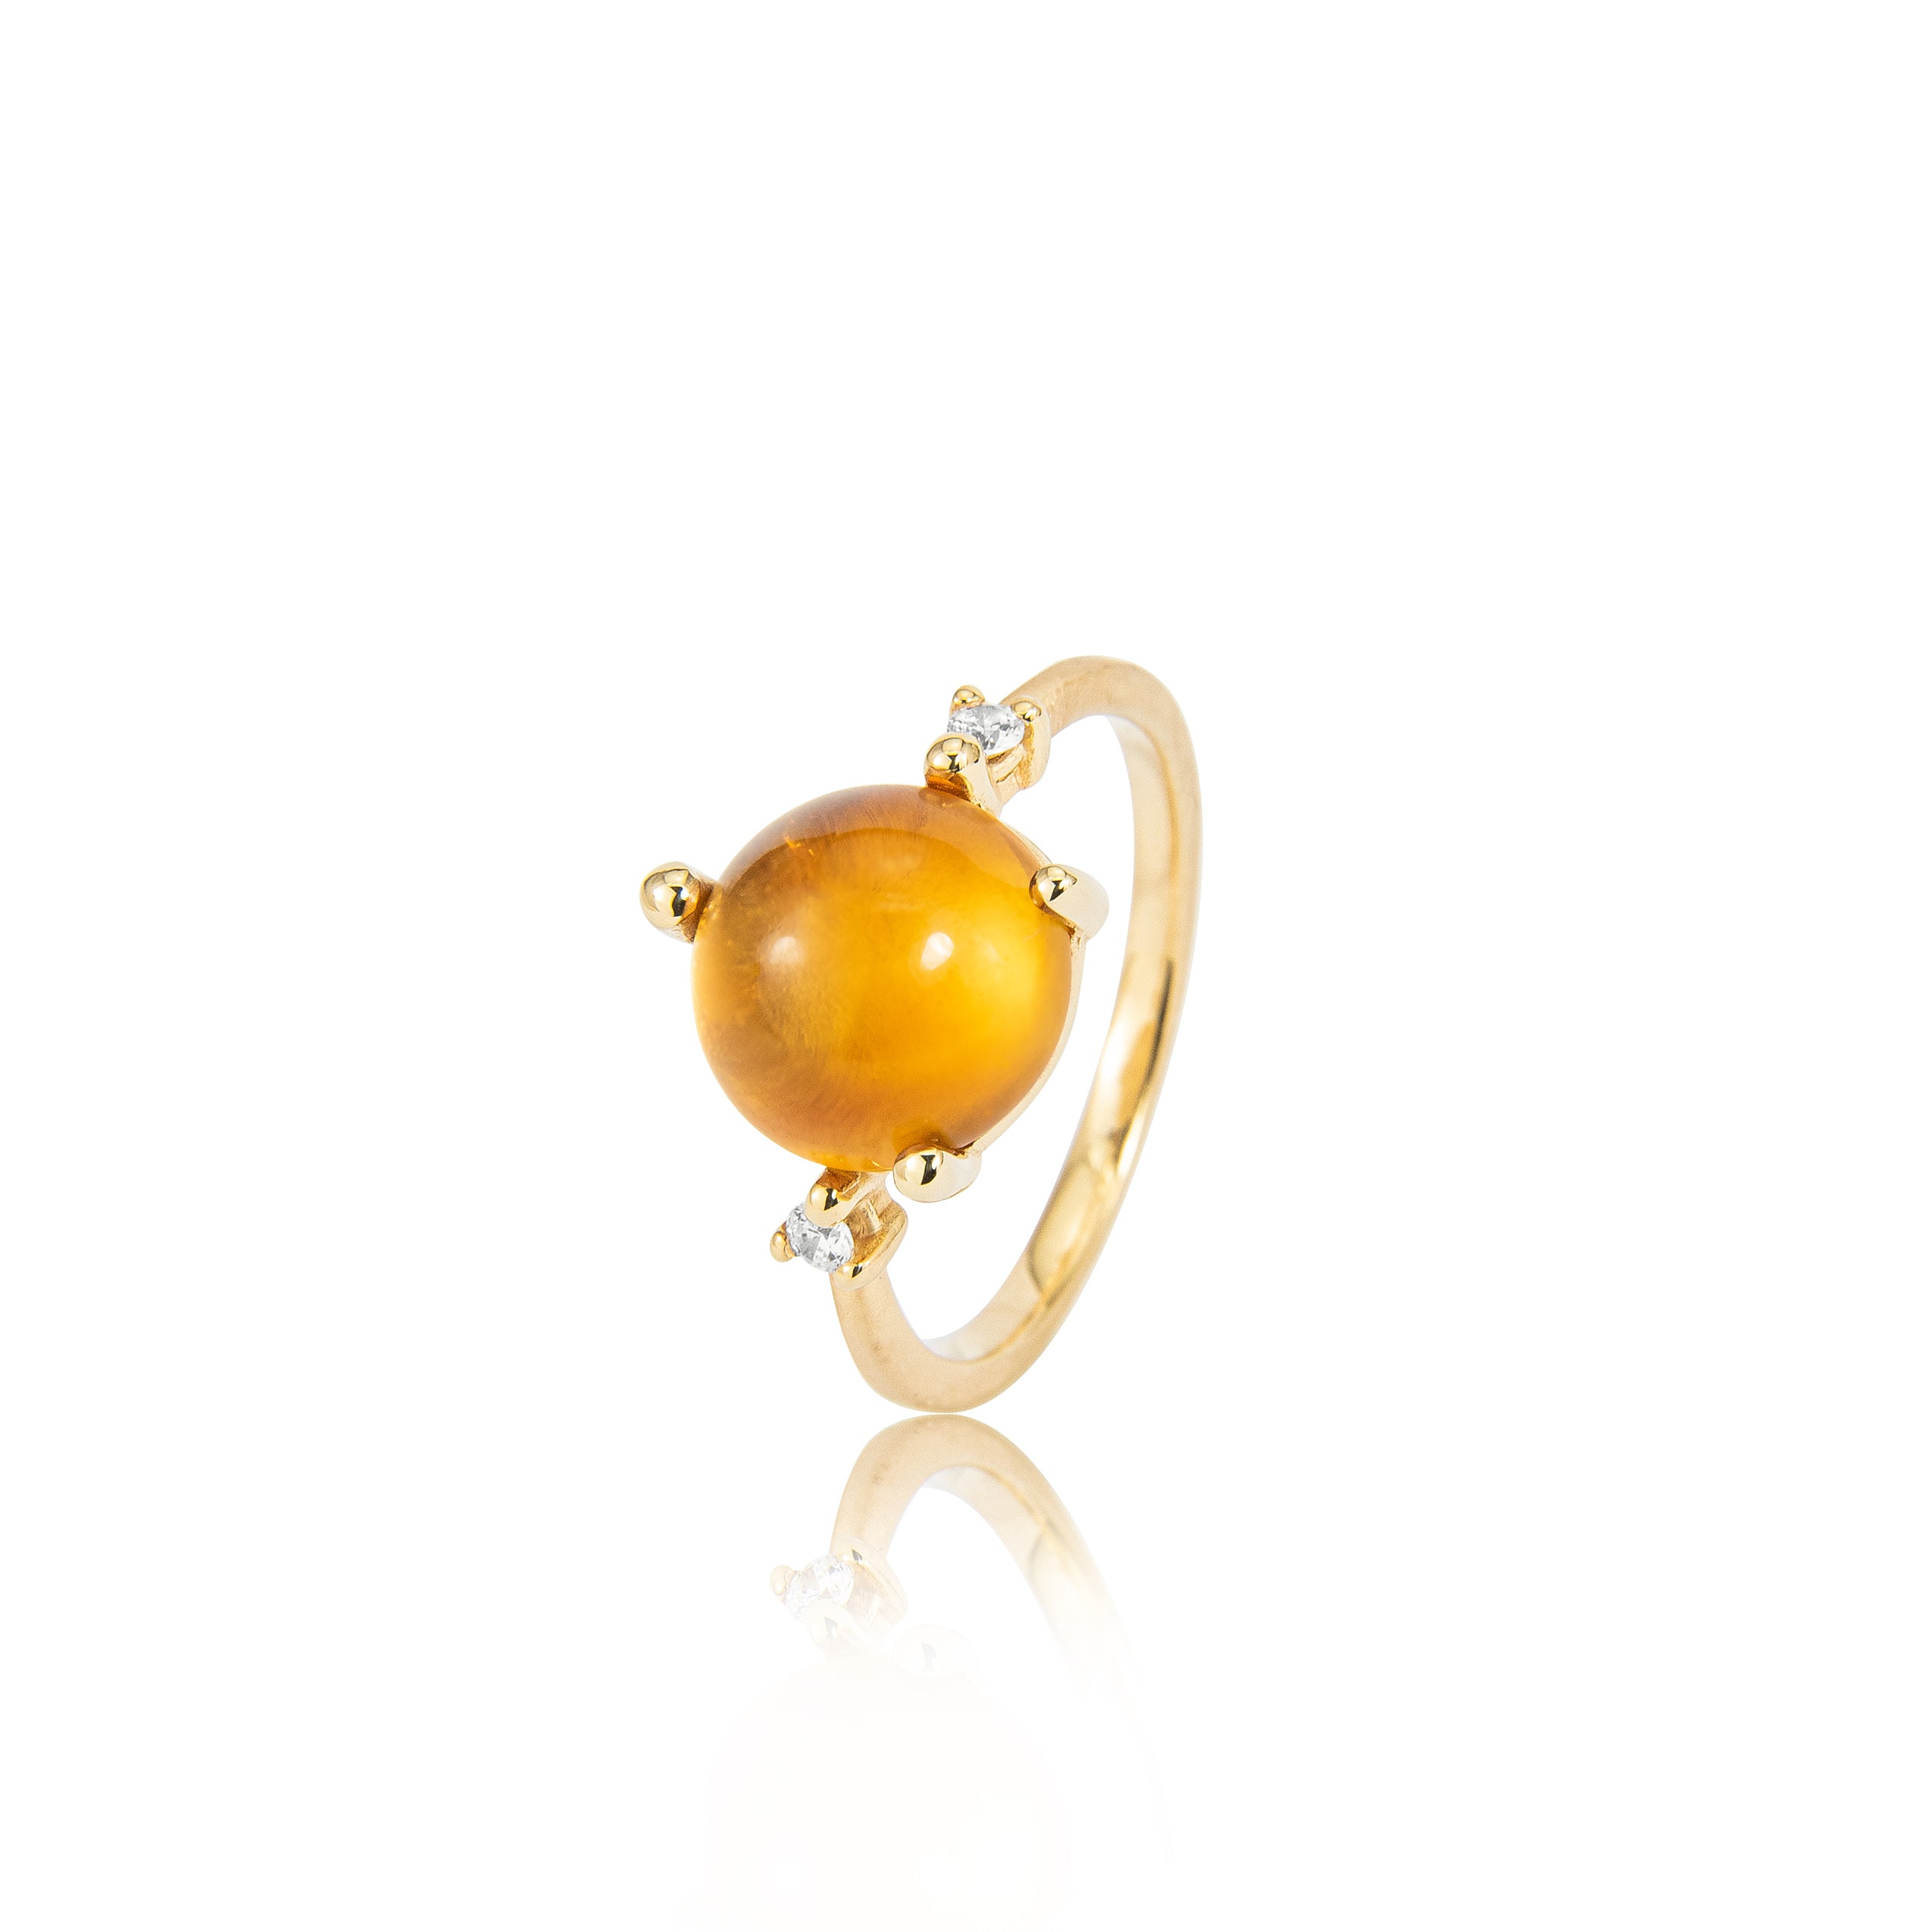 Stellini ring "big" in 585/- gold with citrine